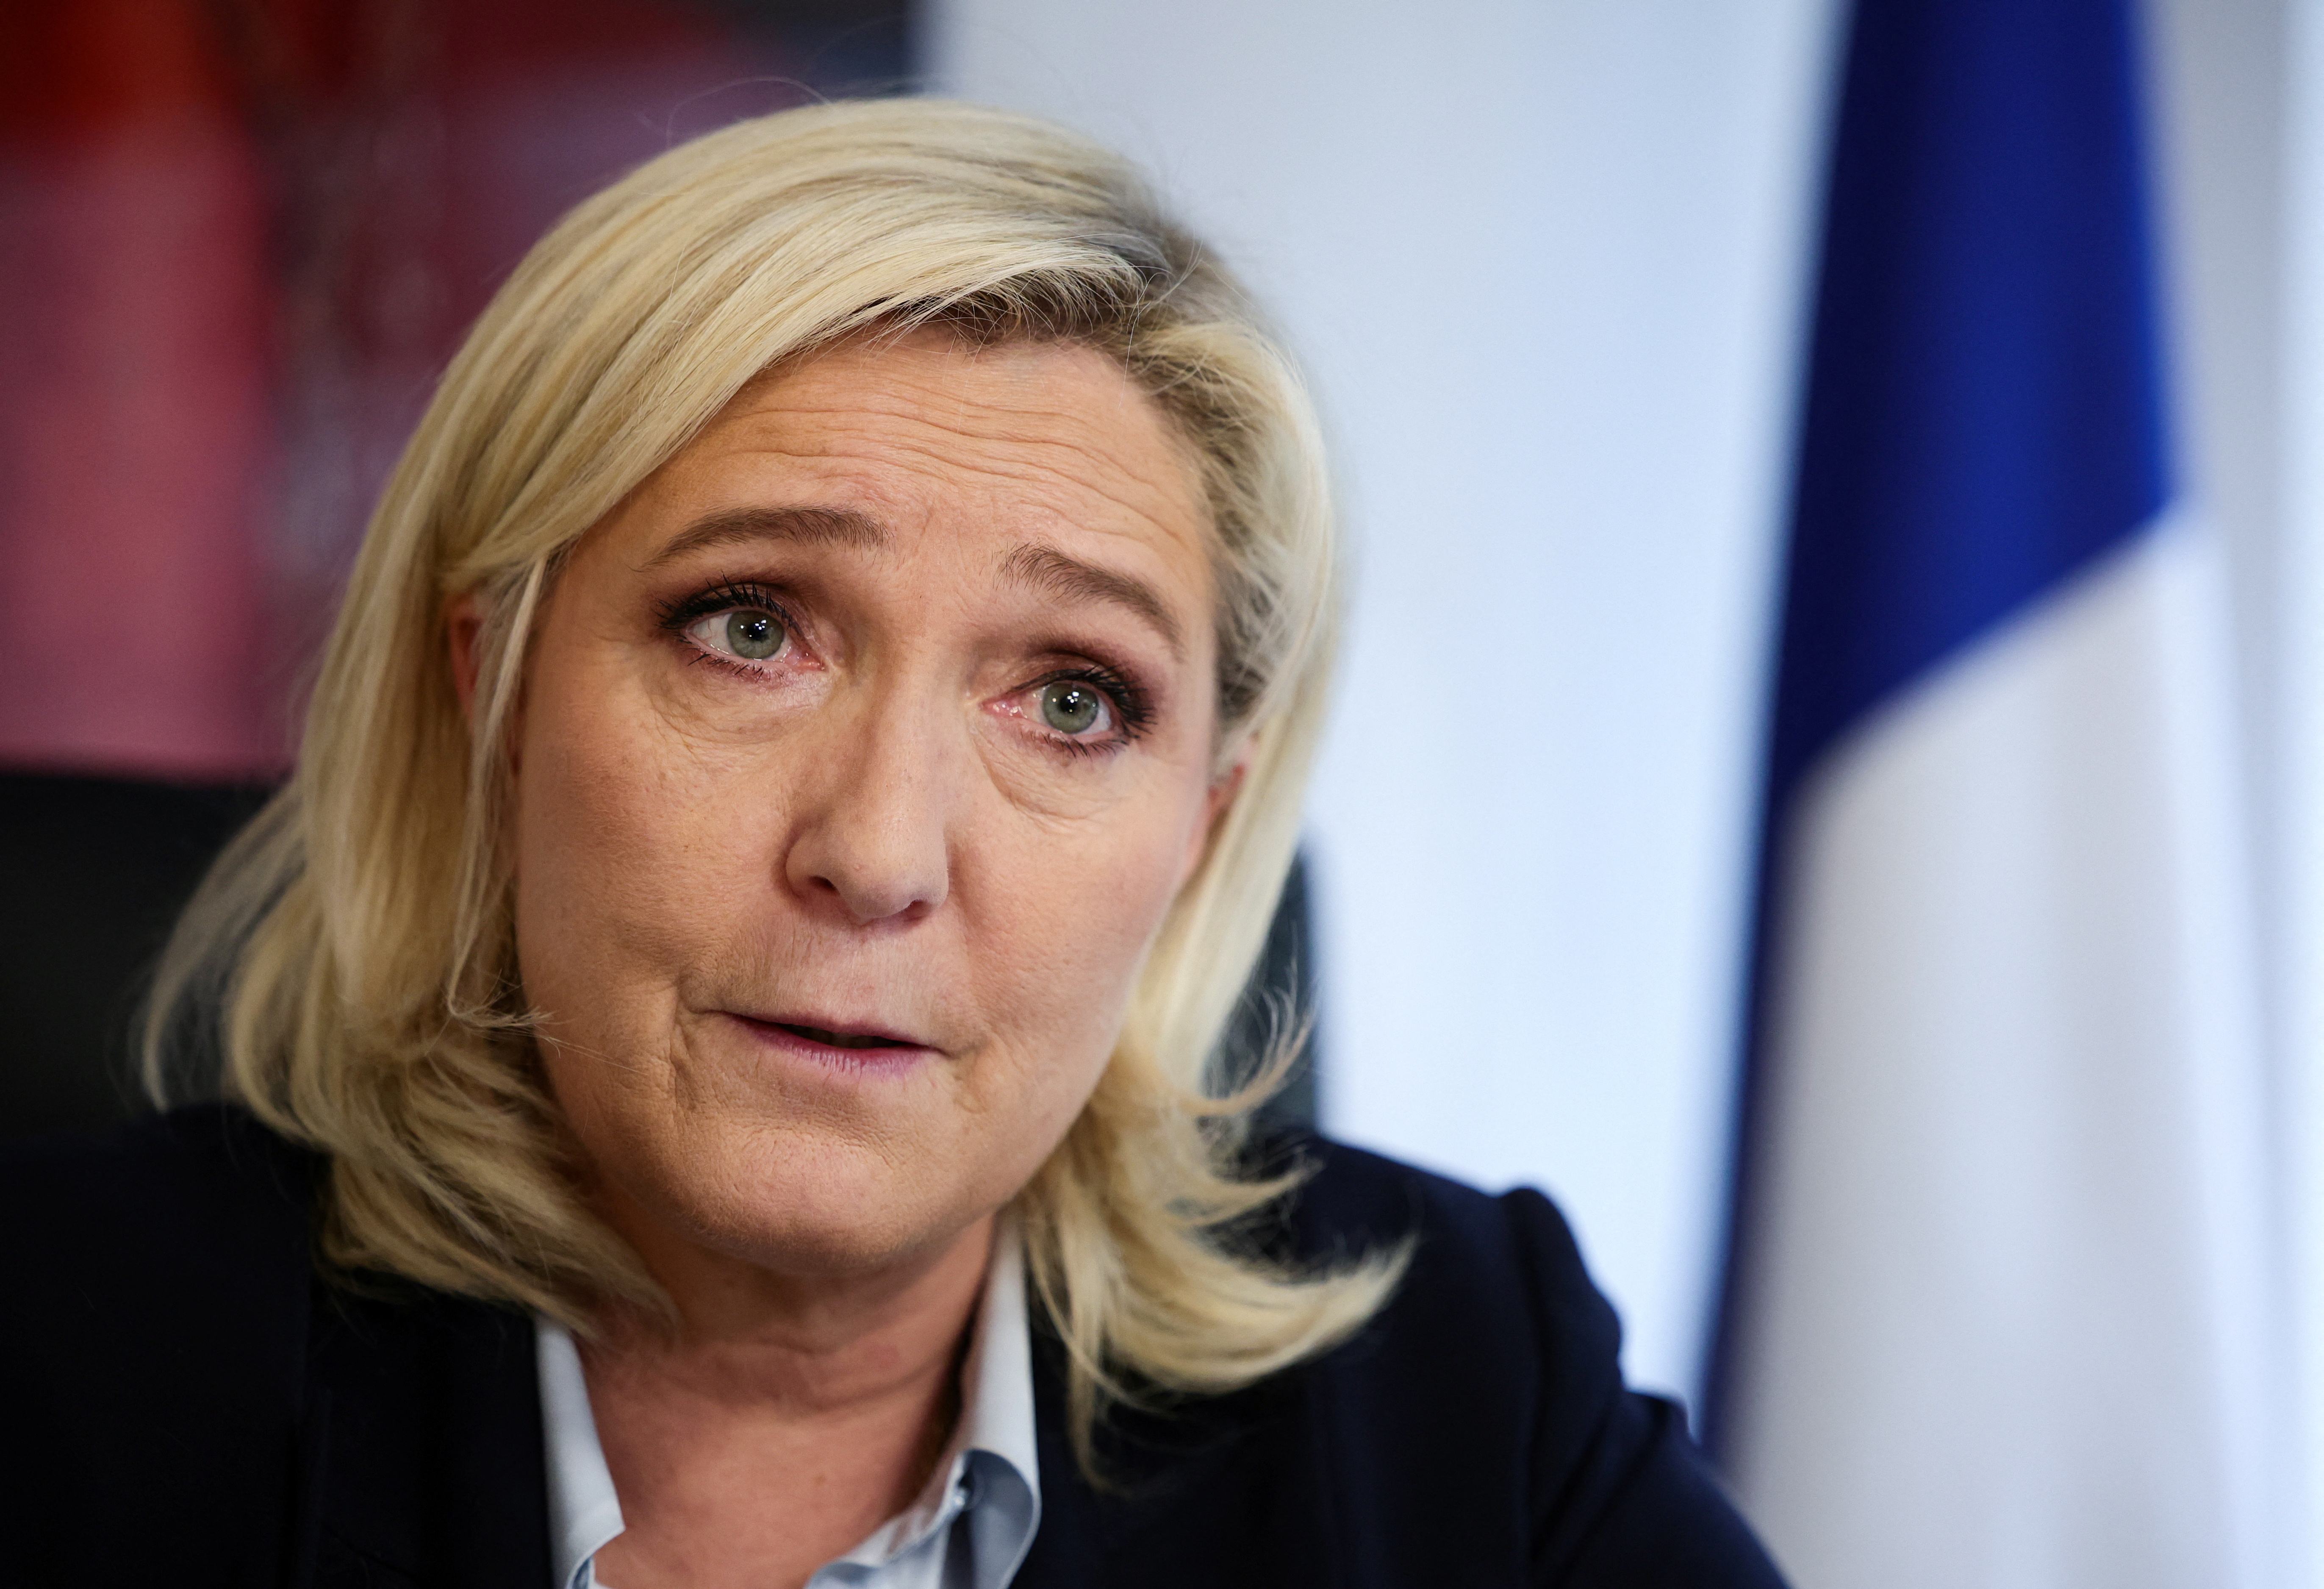 Interview with Marine Le Pen, French far-right presidential candidate, in Paris